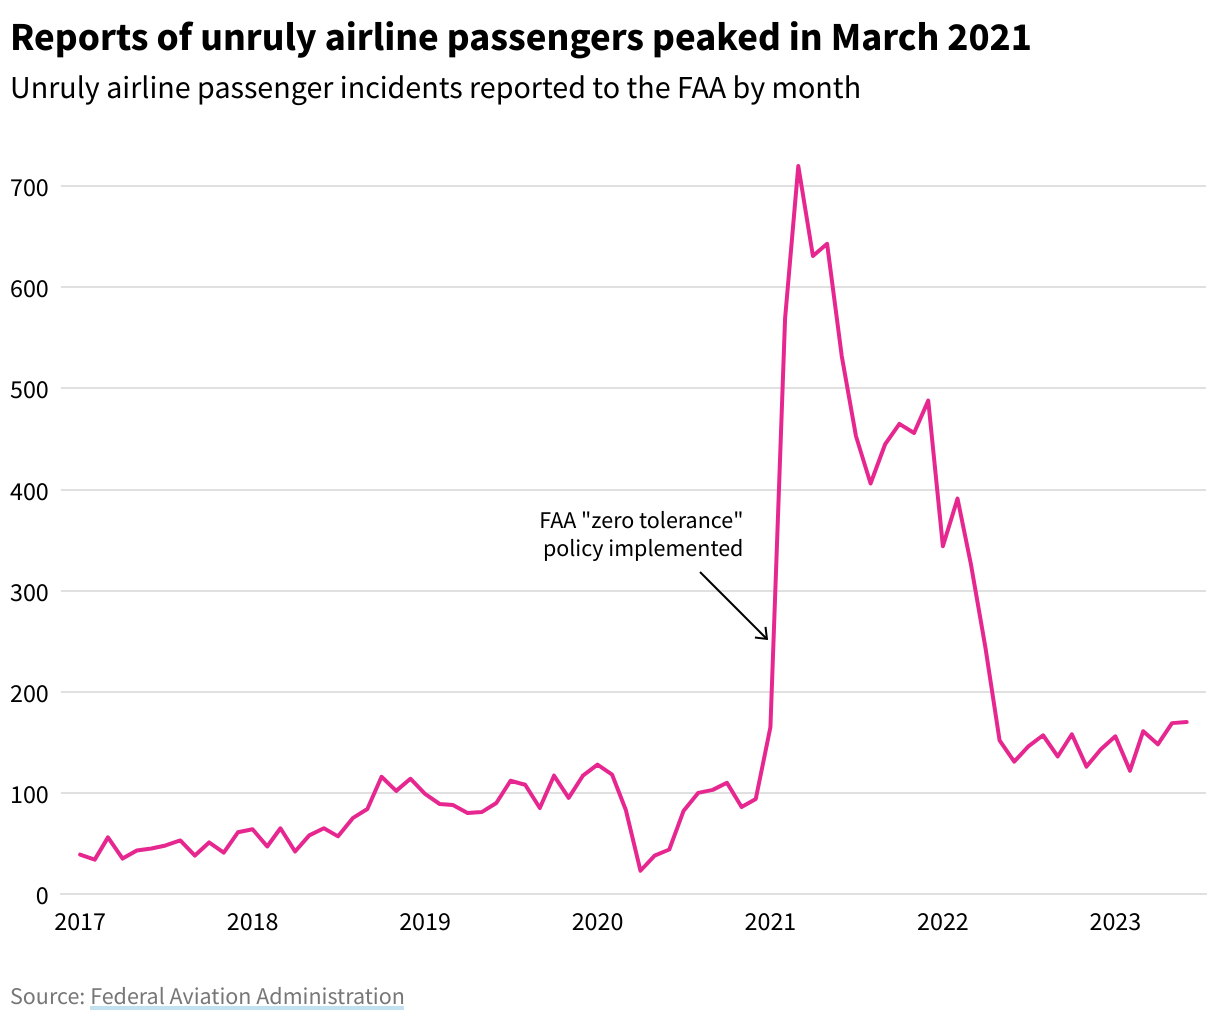 Line chart of unruly airline passenger incidents on domestic airlines reported to the FAA by month showing incidents rising in early 2021 and peaking in March.